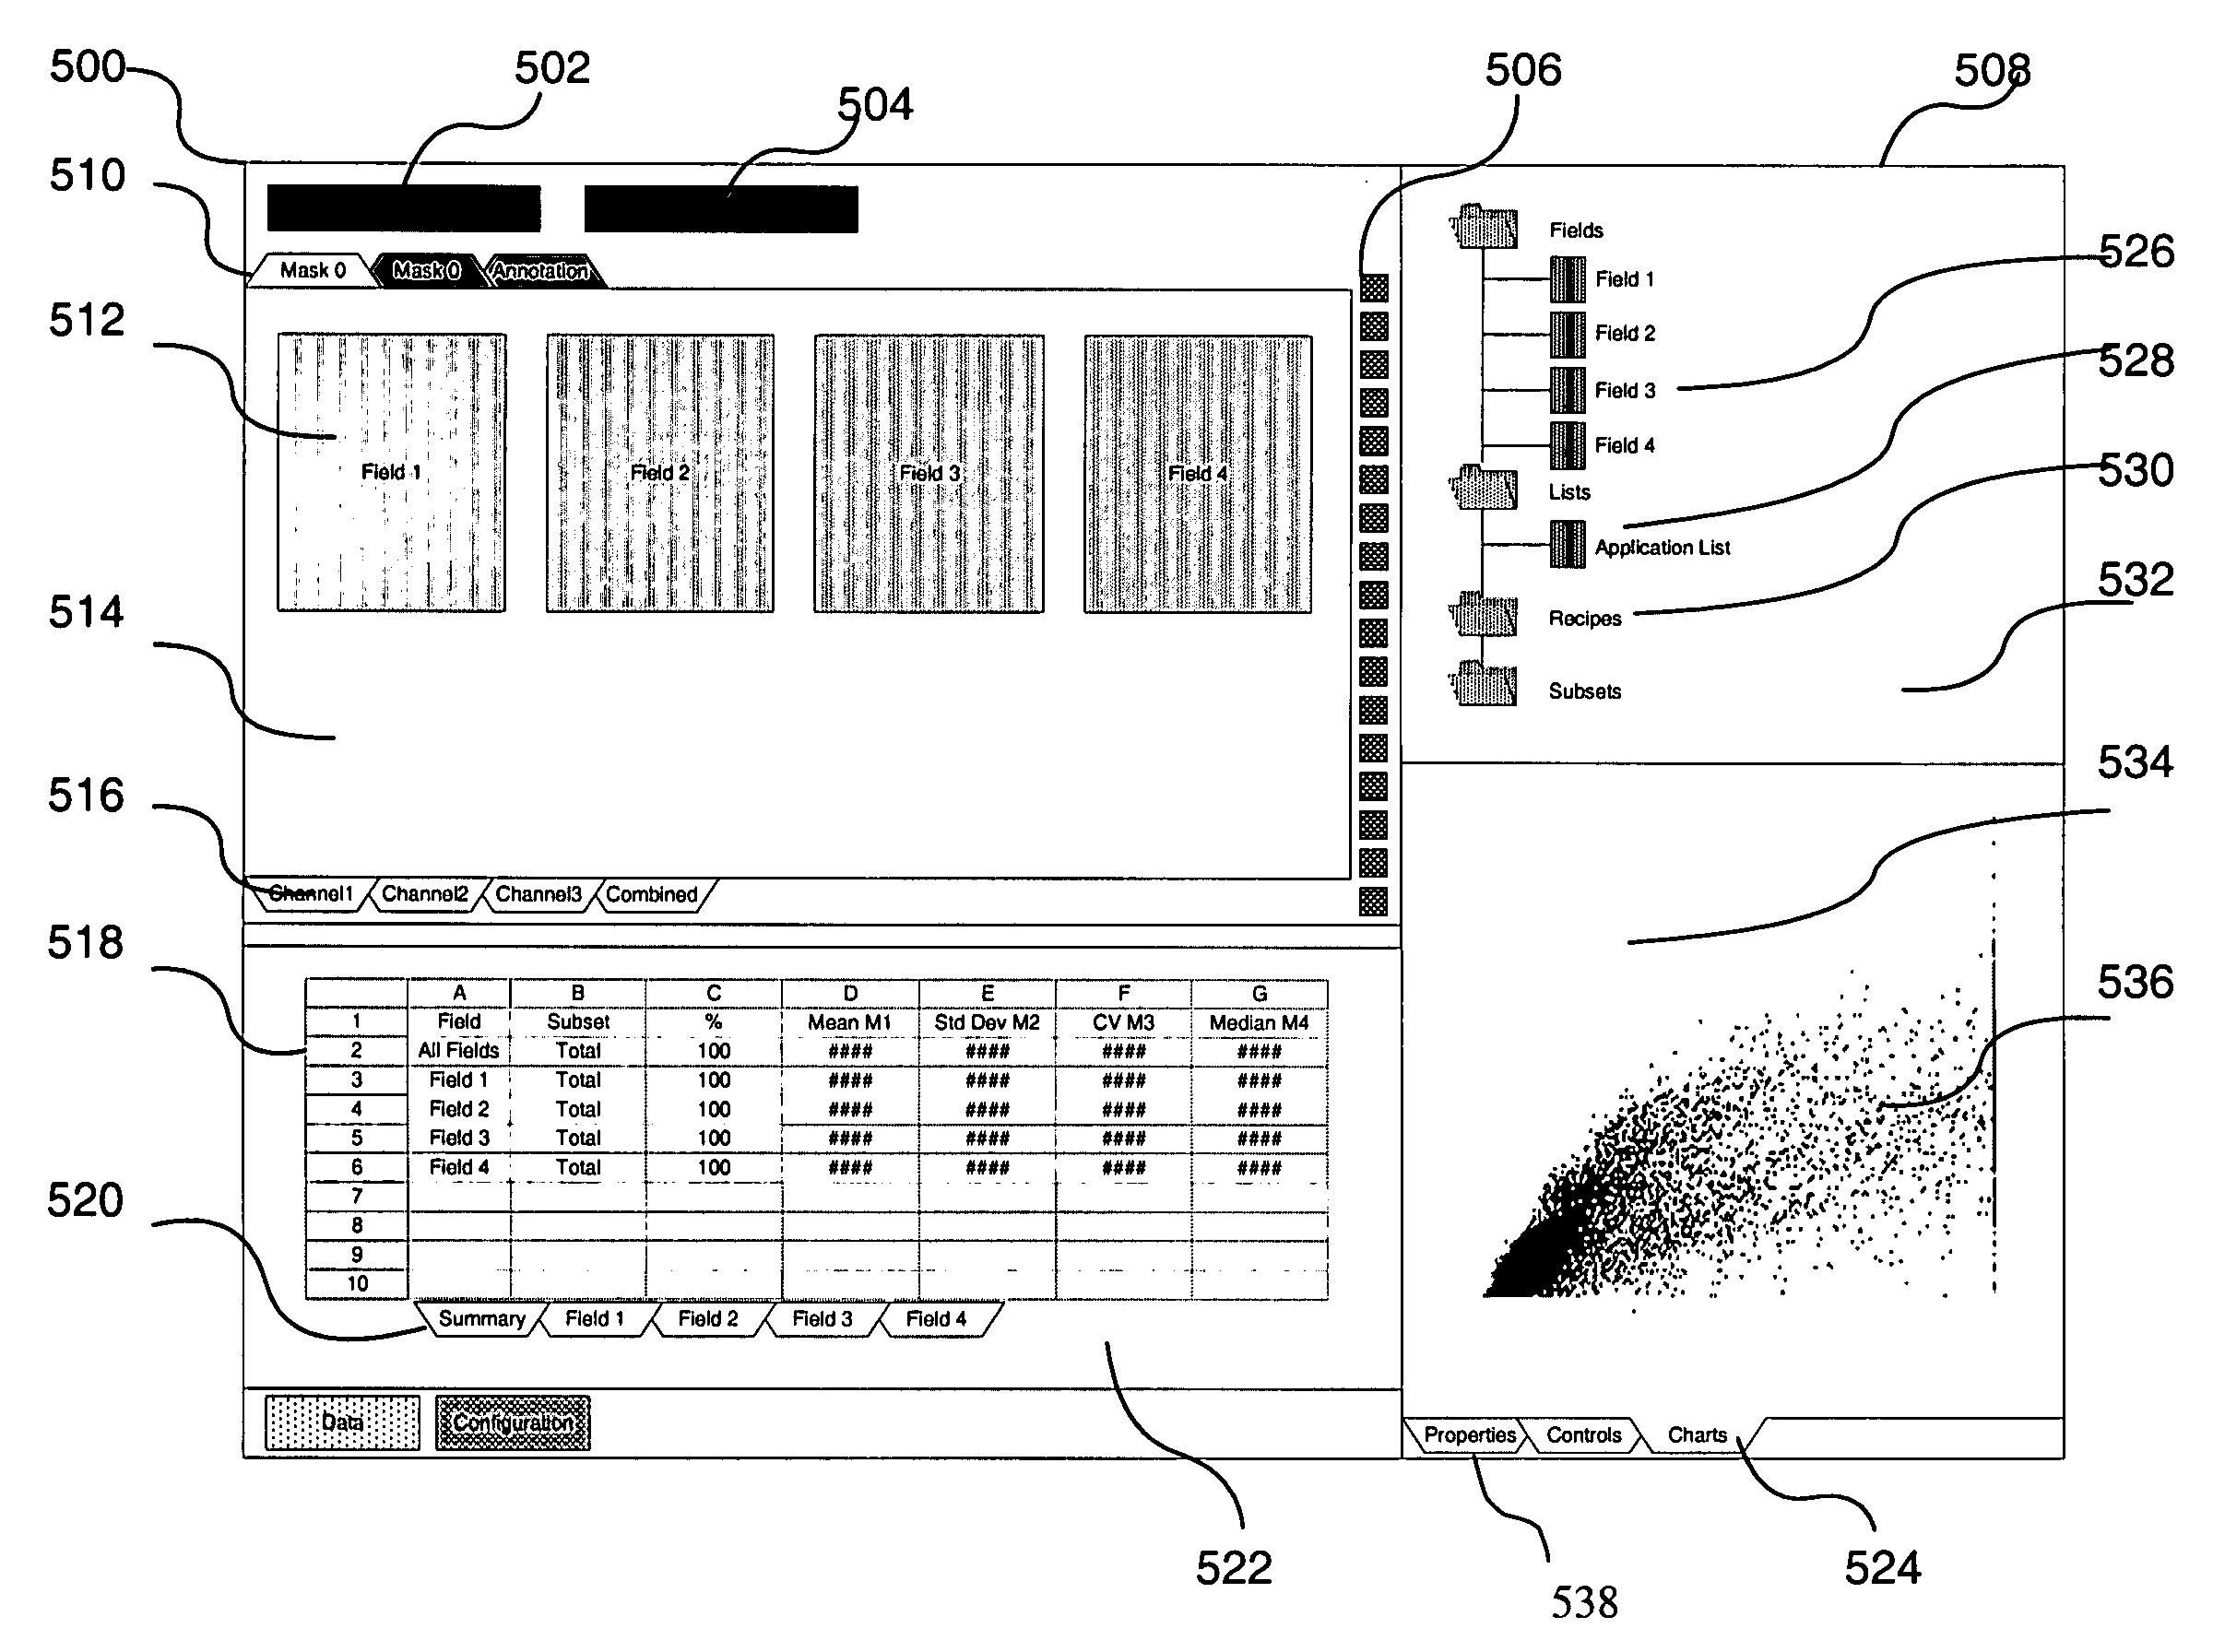 Integrated human-computer interface for image recognition